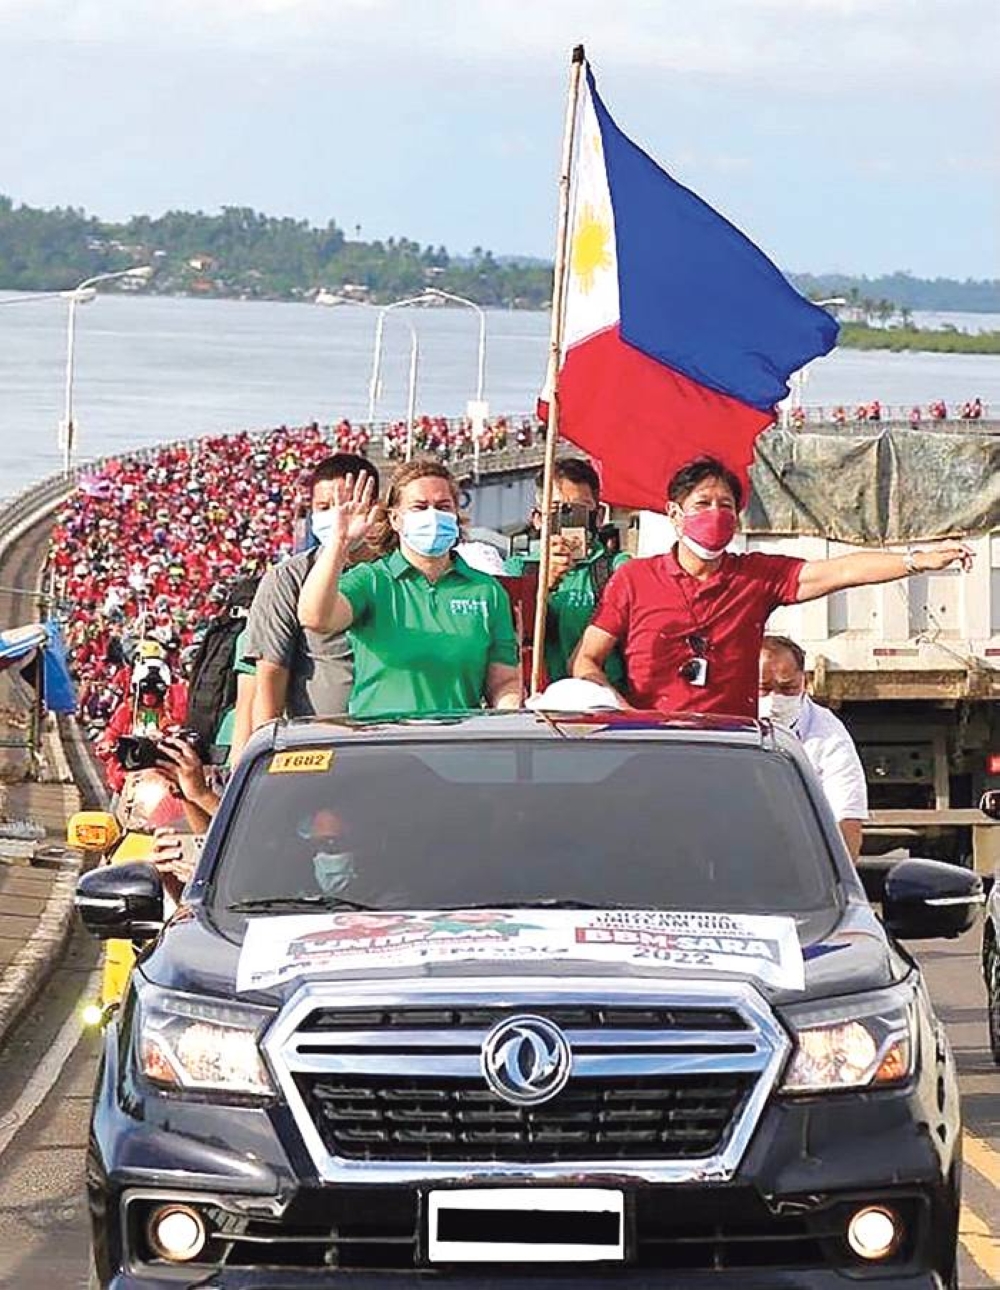 BRIDGE ‘INVASION’ Former senator Ferdinand ‘Bongbong’ Marcos Jr. and running mate Davao City Mayor Sara Duterte-Carpio lead UniTeam’s rally at the San Juanico Bridge on Tuesday, Nov. 30, 2021 during the symbolic meeting of thousands of their supporters from Luzon, the Visayas and Mindanao. CONTRIBUTED PHOTO